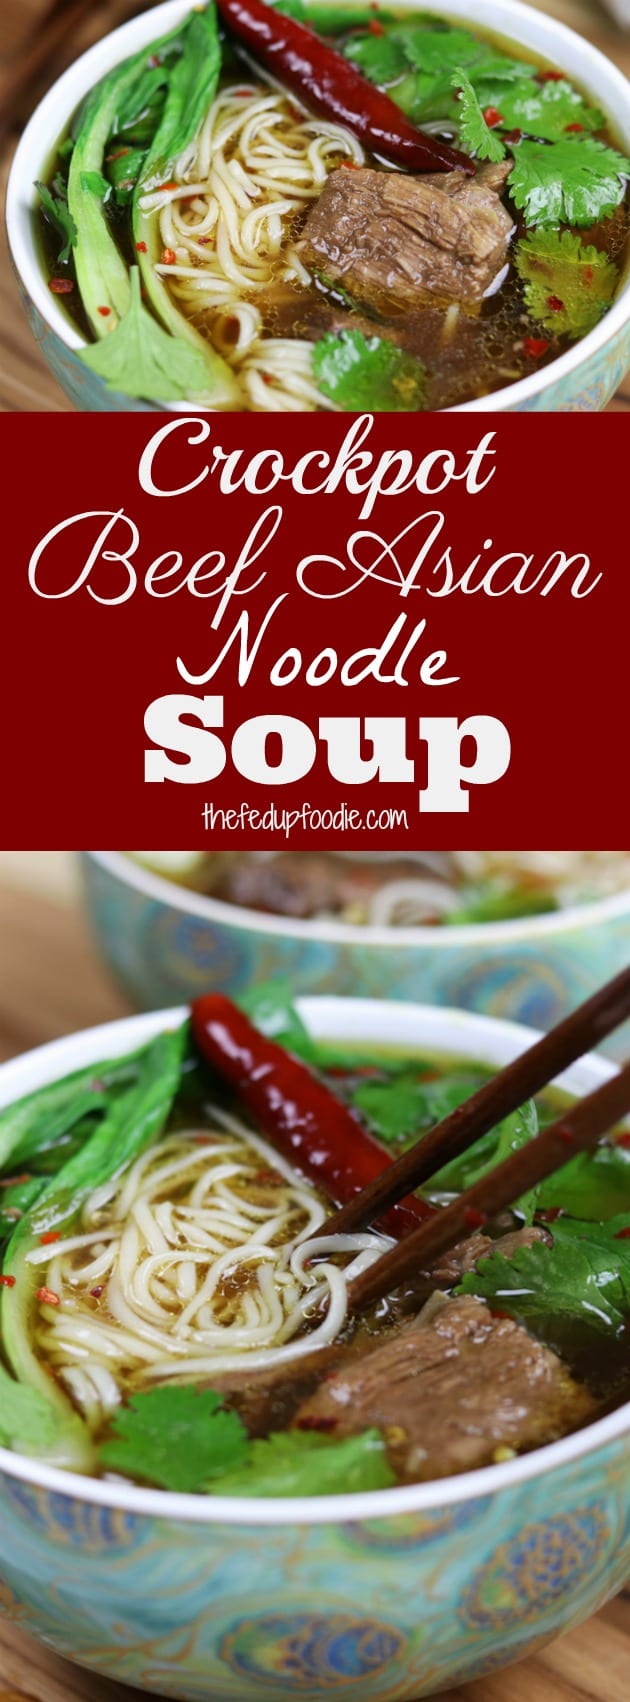 Crockpot Beef Asian Noodle Soup is like the best of all Asian soups. Easy steps for preparation with loads of flavor. One of my favorites! https://www.thefedupfoodie.com/beef-asian-noodle-soup/